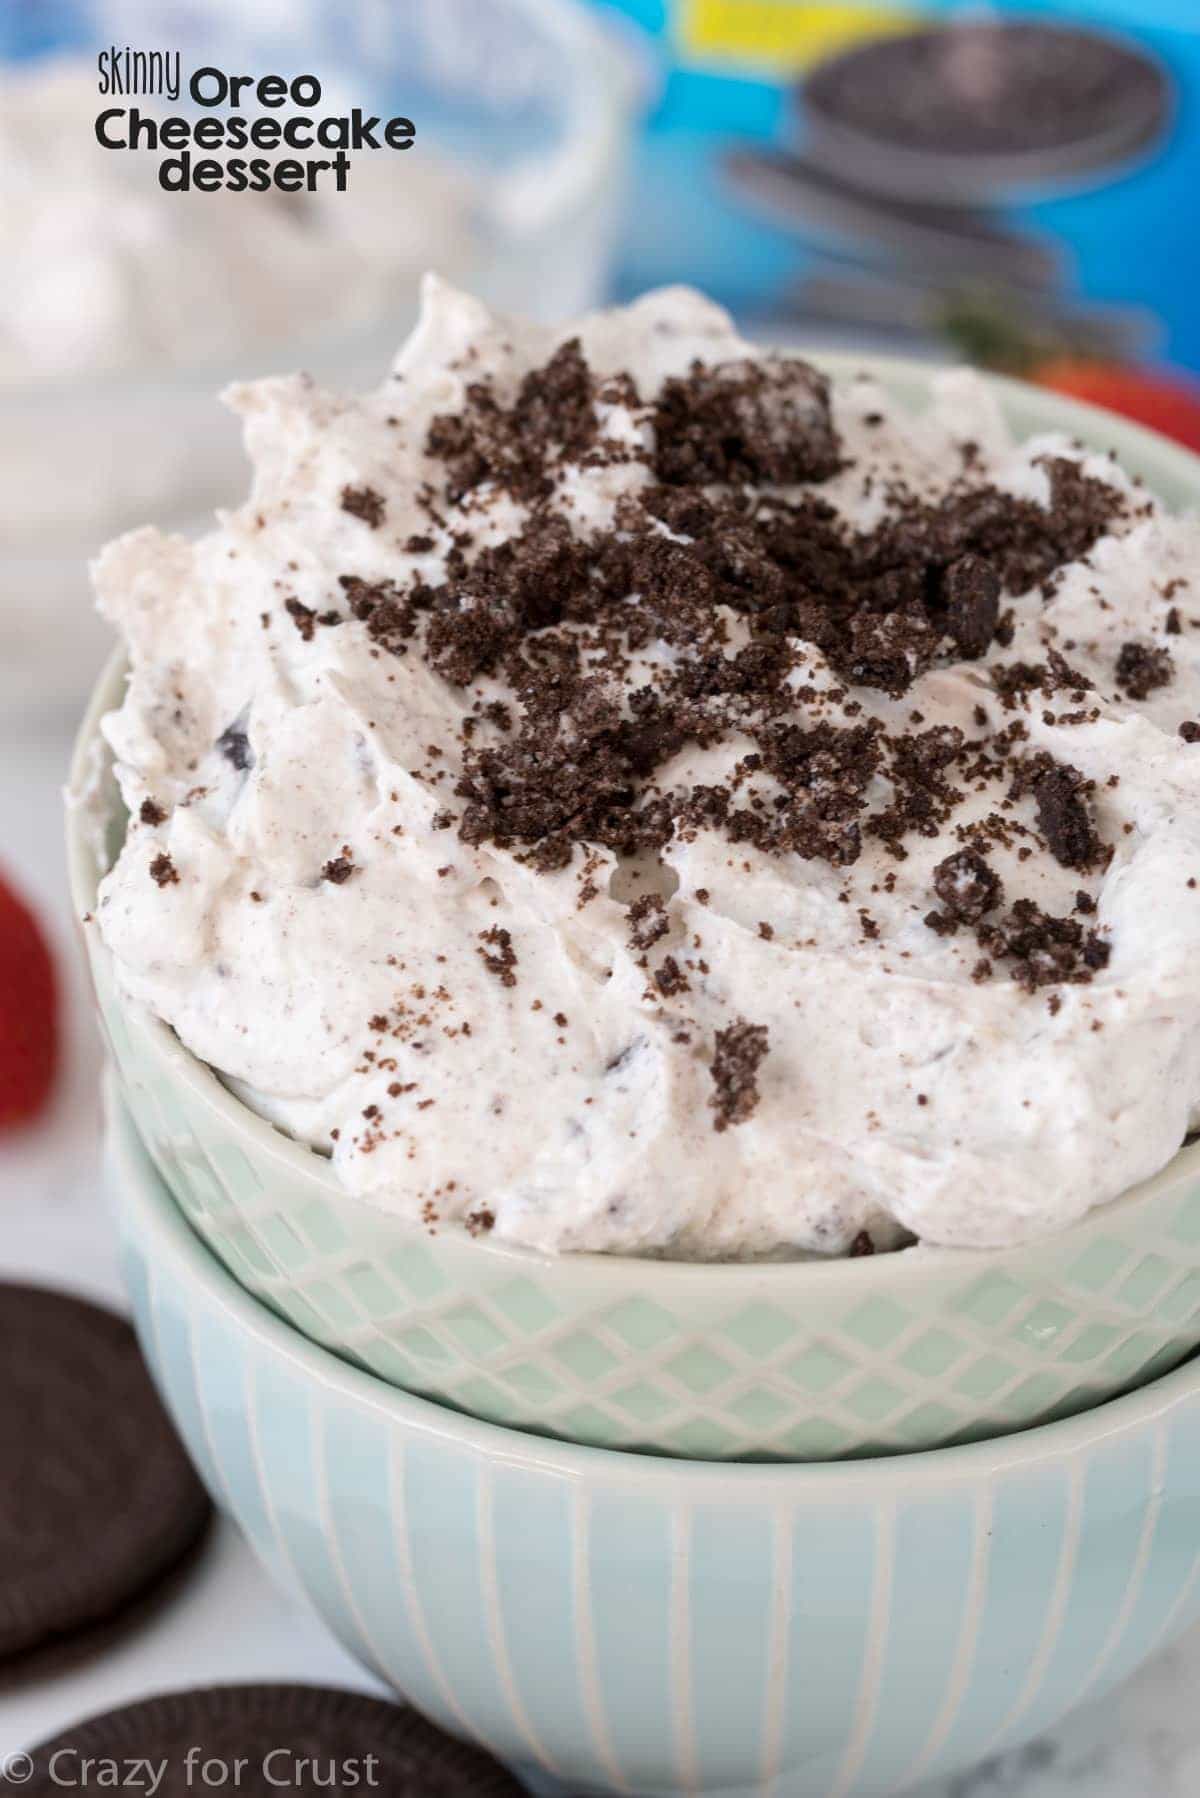 Skinny Oreo Cheesecake Dessert - this easy no-bake Oreo Cheesecake can be used as a dip or eaten with a spoon. And it has less fat and sugar and more protein!